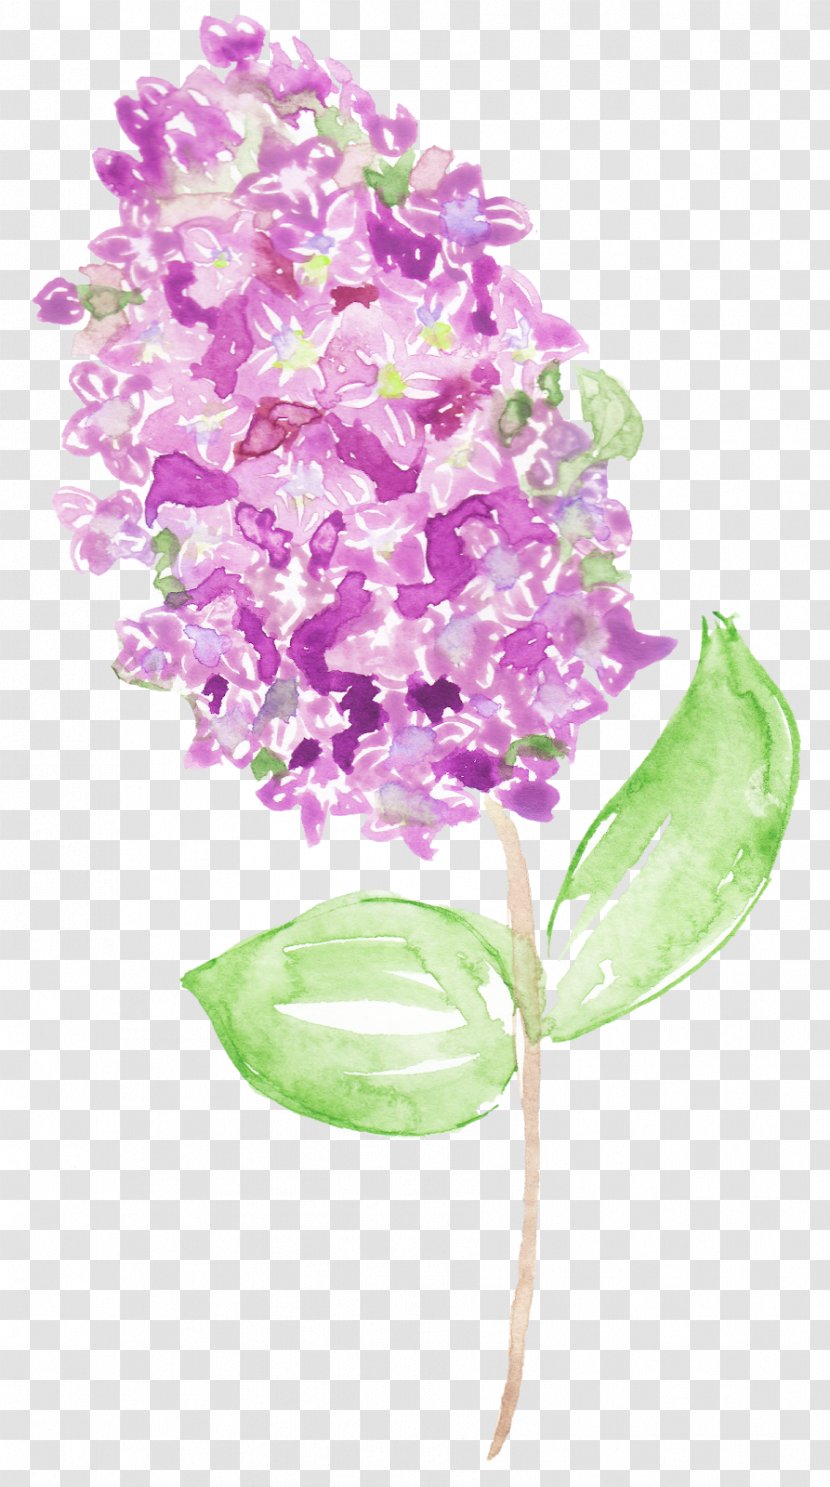 Watercolor Painting Image Flower Vector Graphics - Lilac - Hydrangea Sclance Transparent PNG